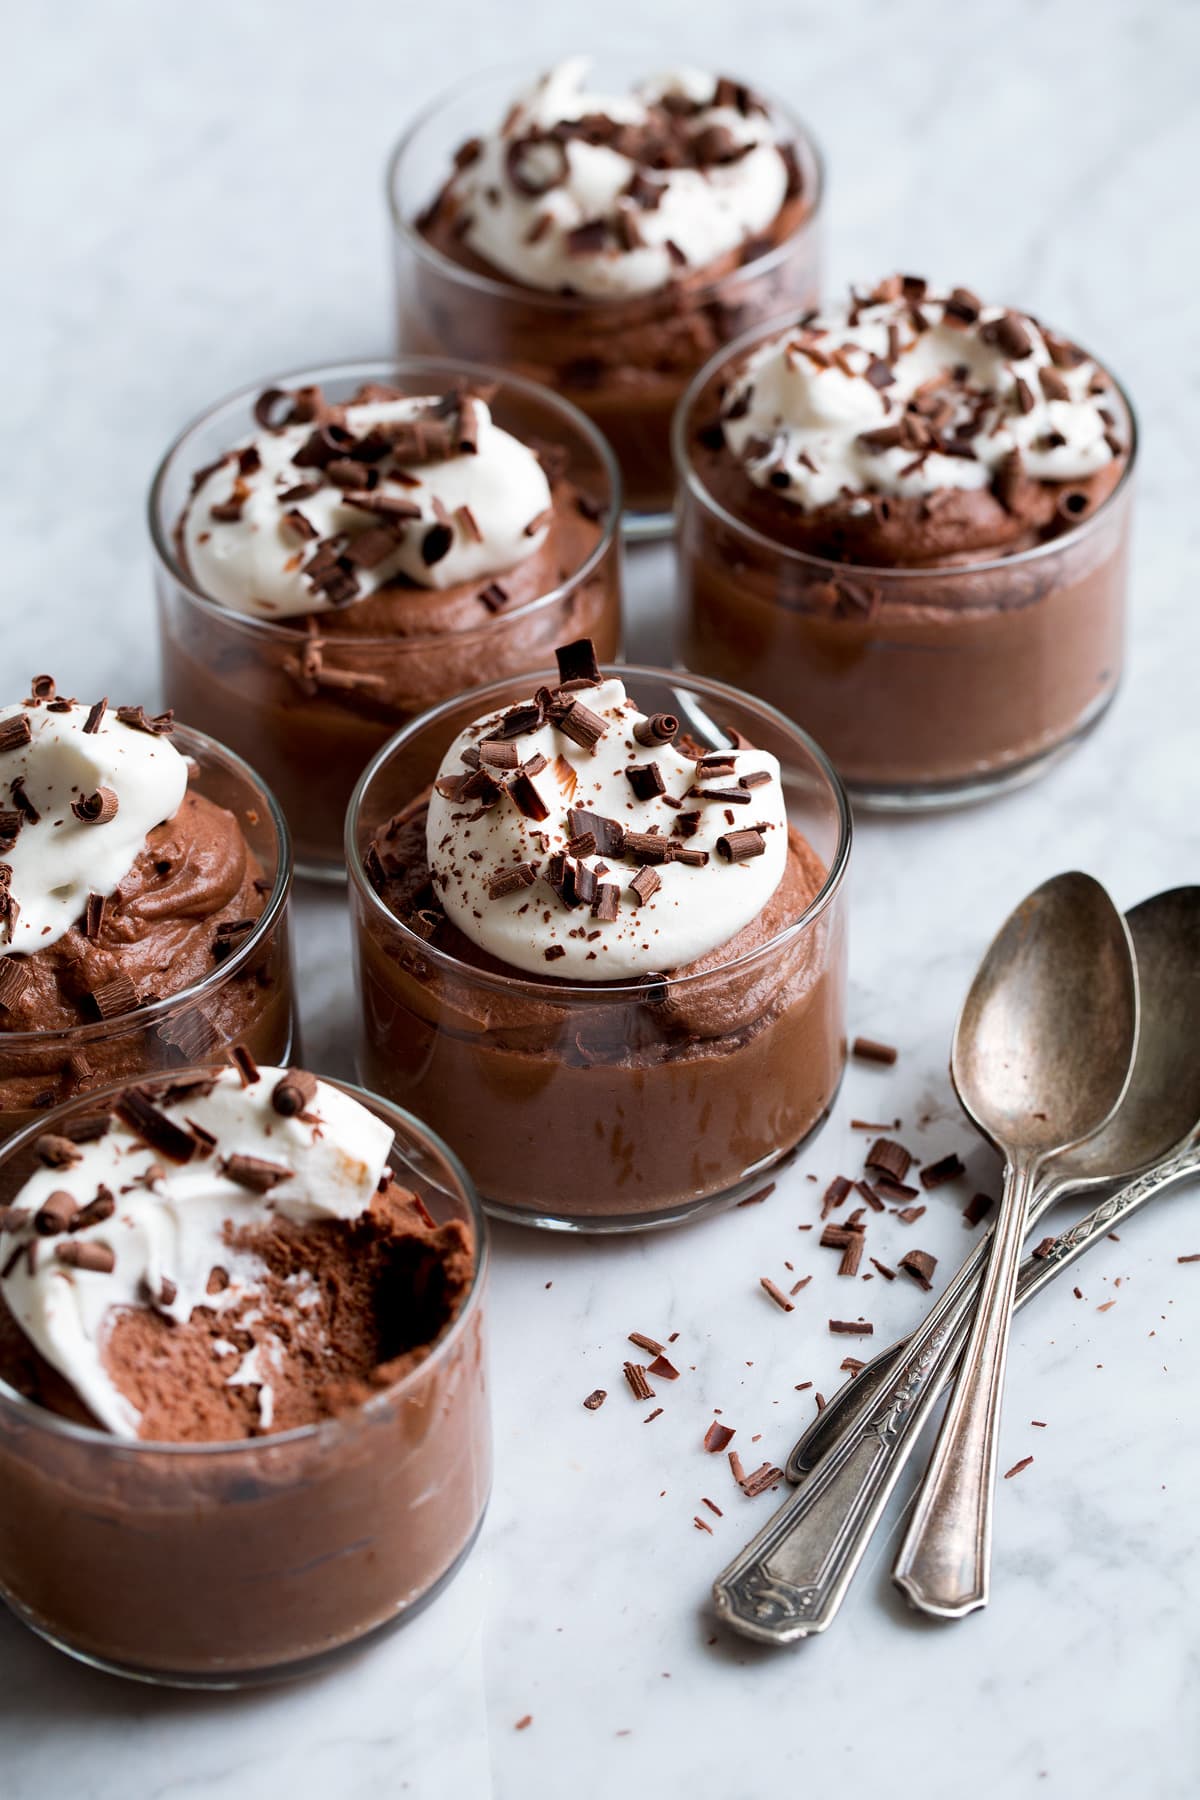 6 servings of chocolate mousse in small glass cups.